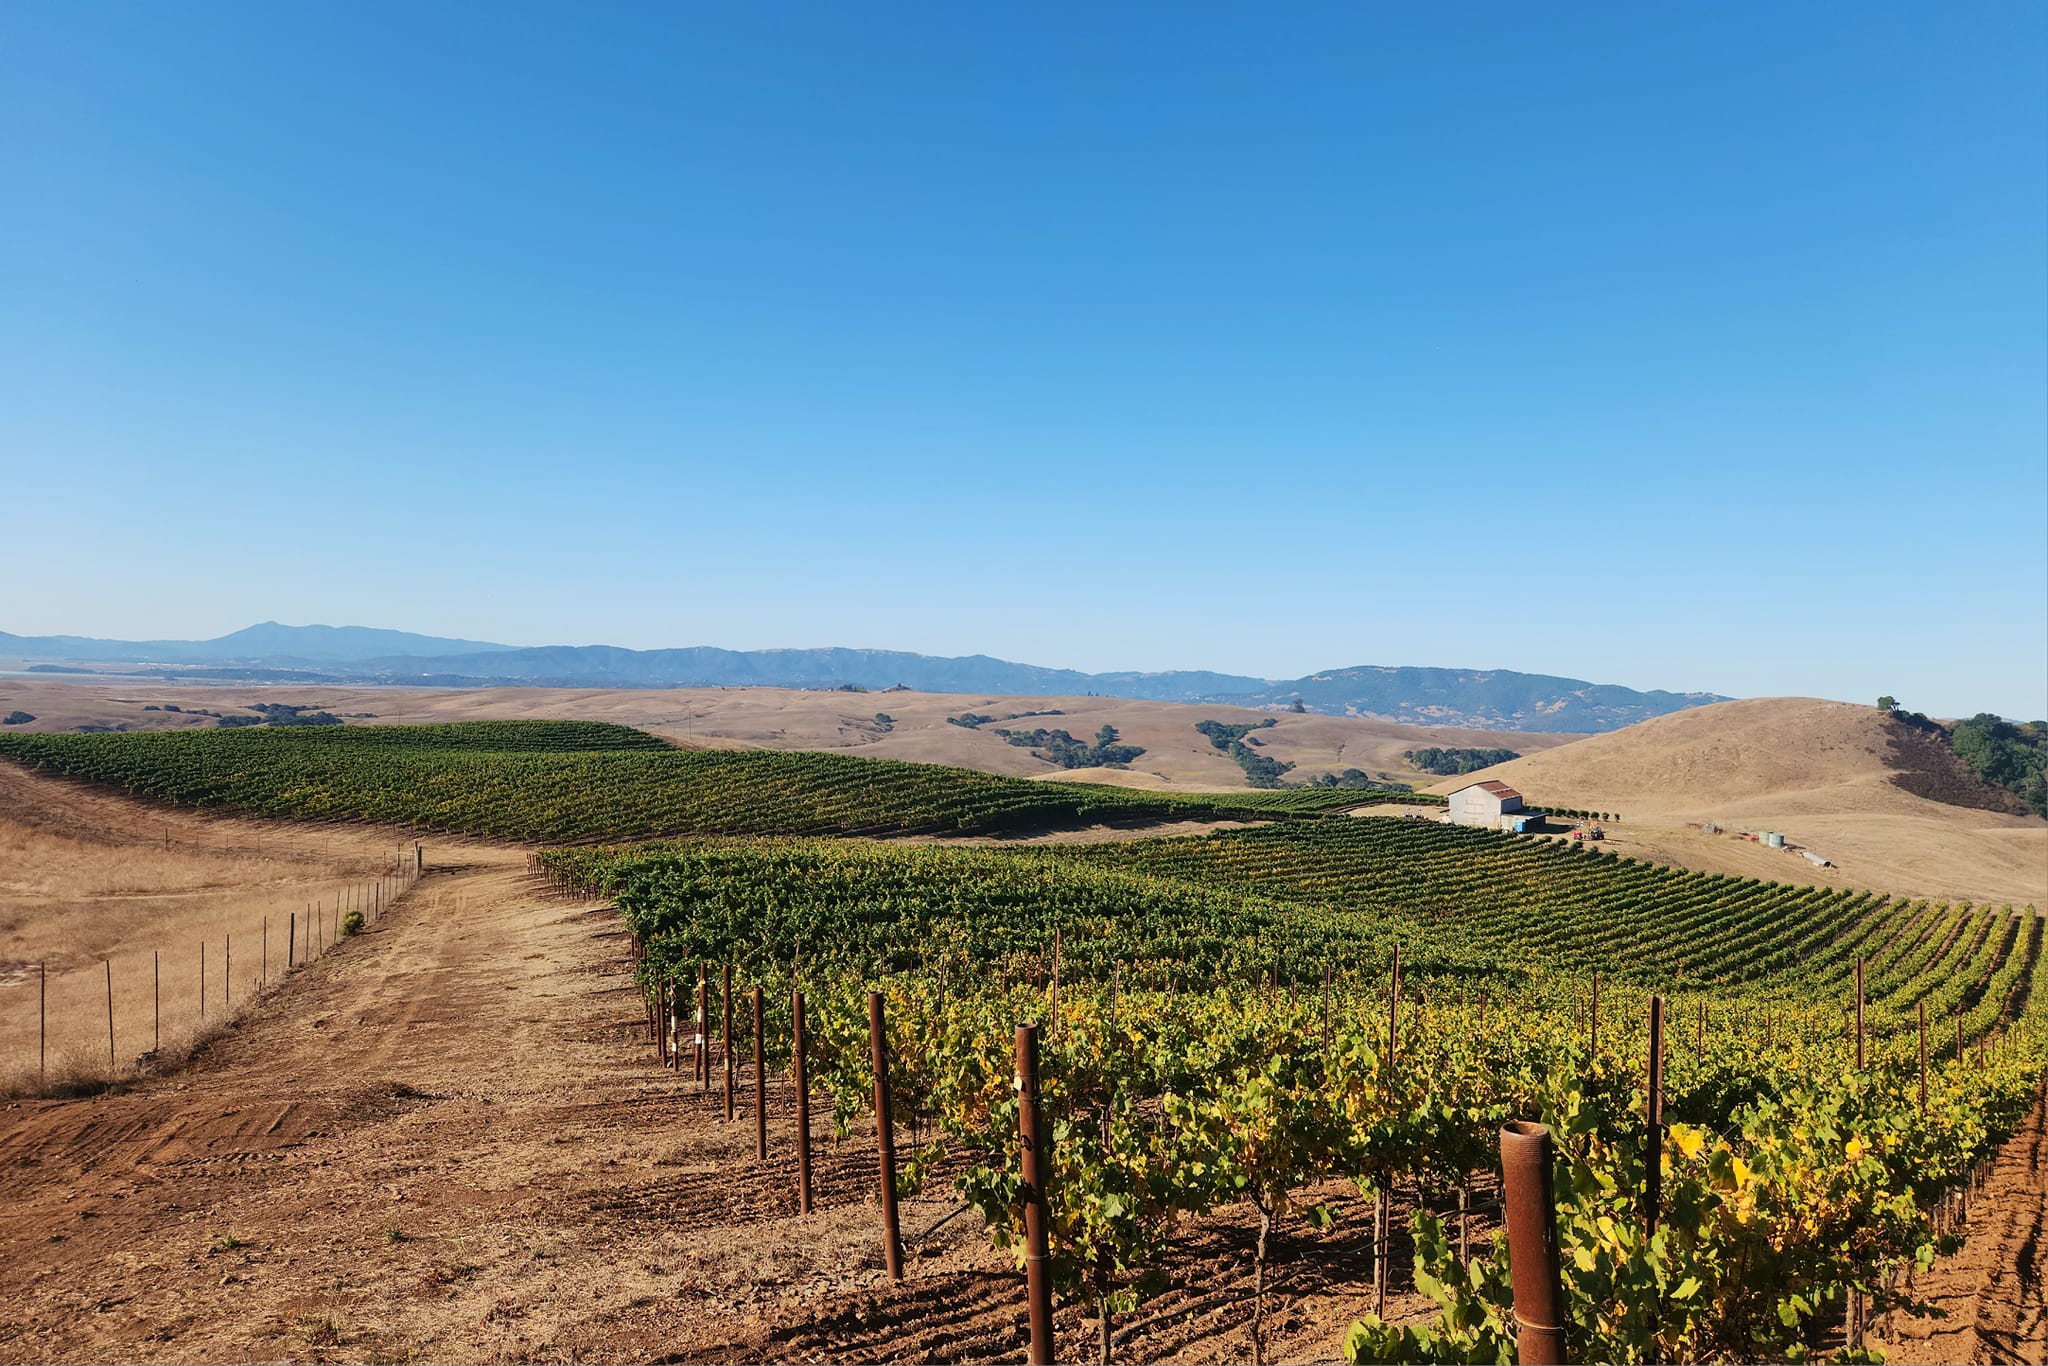 Head to Sonoma County for indulgent wellness experiences that range from yoga sessions set against picturesque vineyards to forest bathing and stargazing.